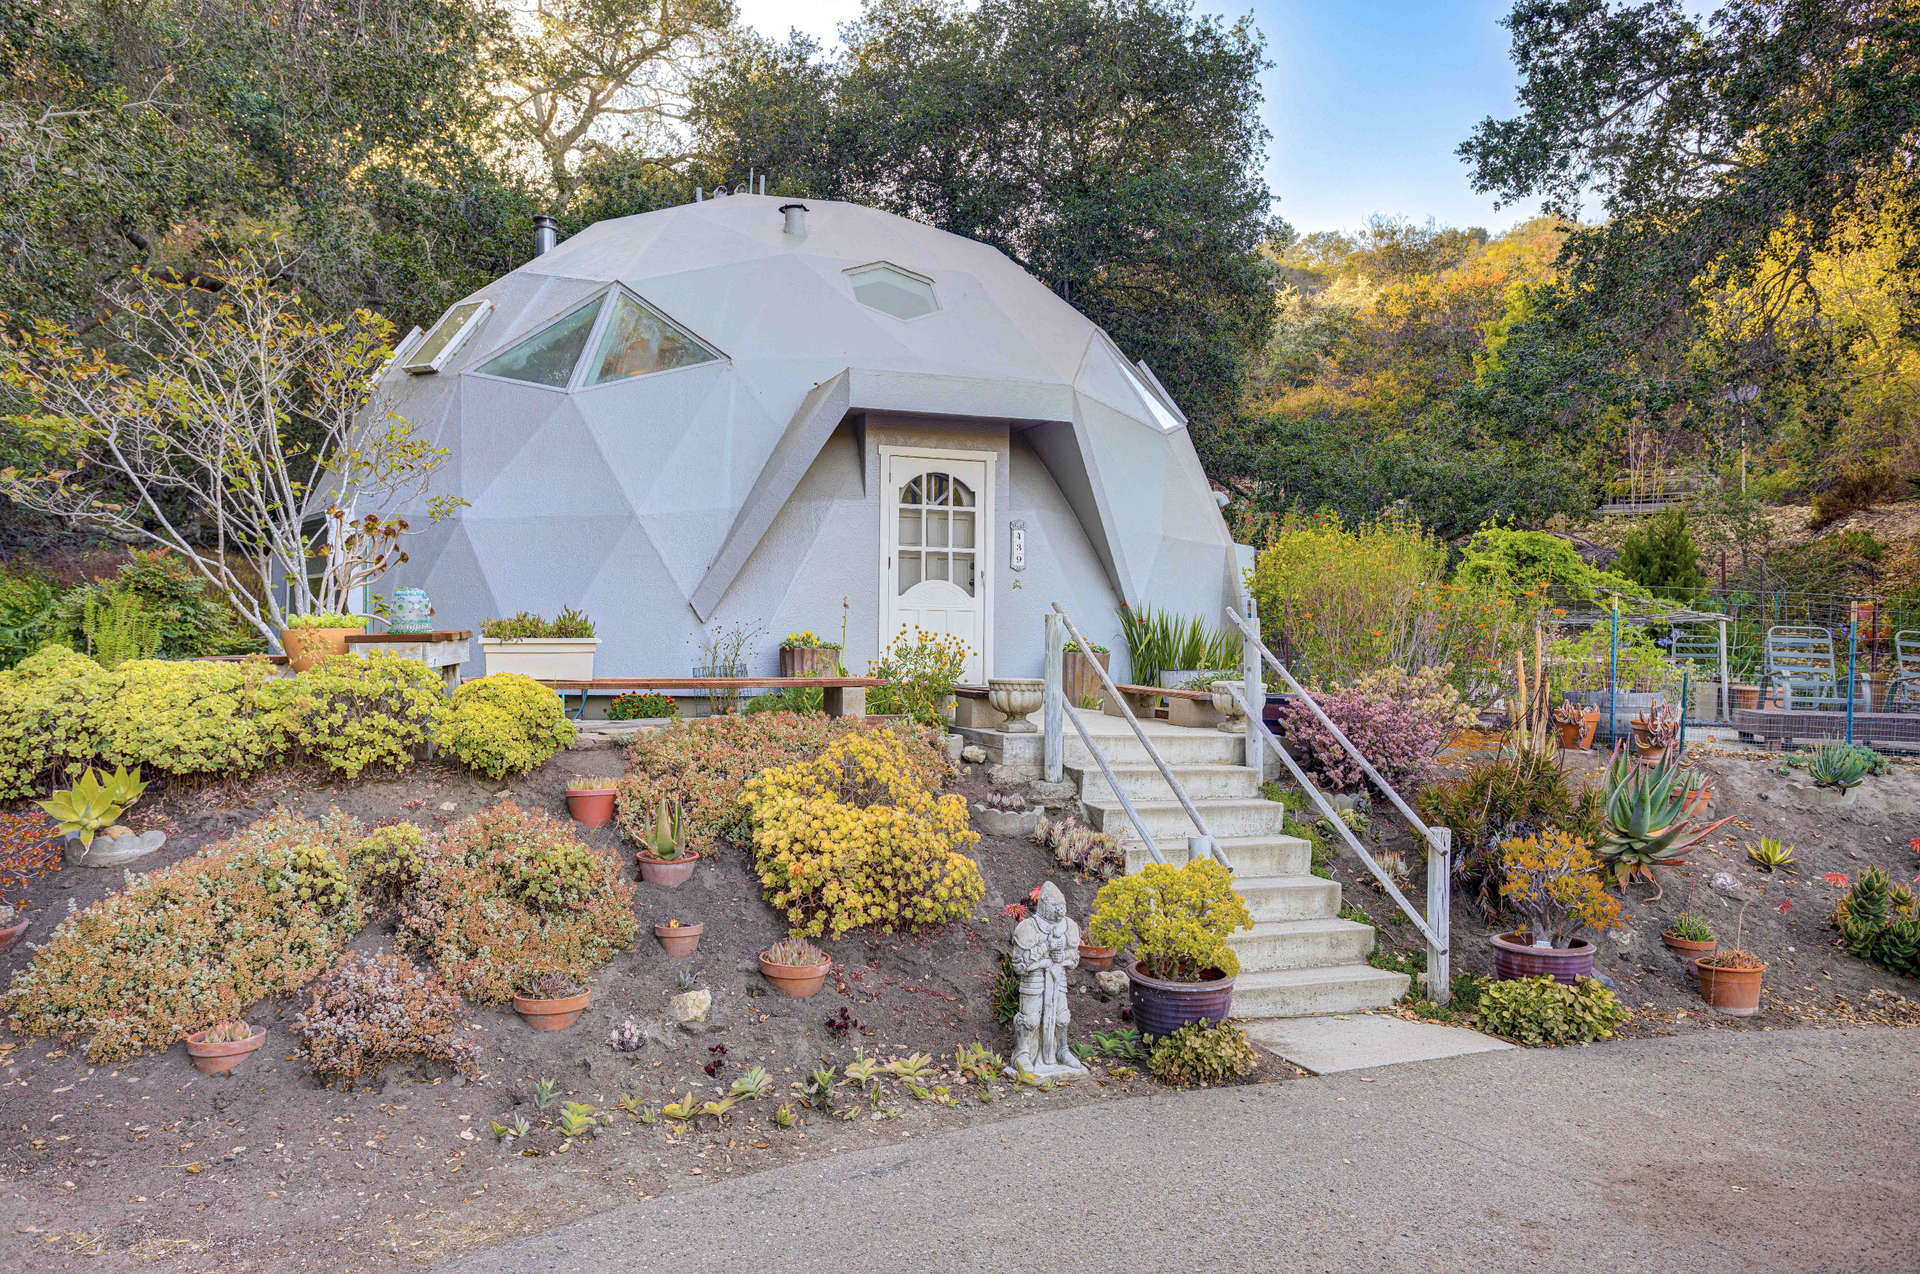 1 of 106. Gorgeous Custom Built (not a kit) Geodesic Dome Home